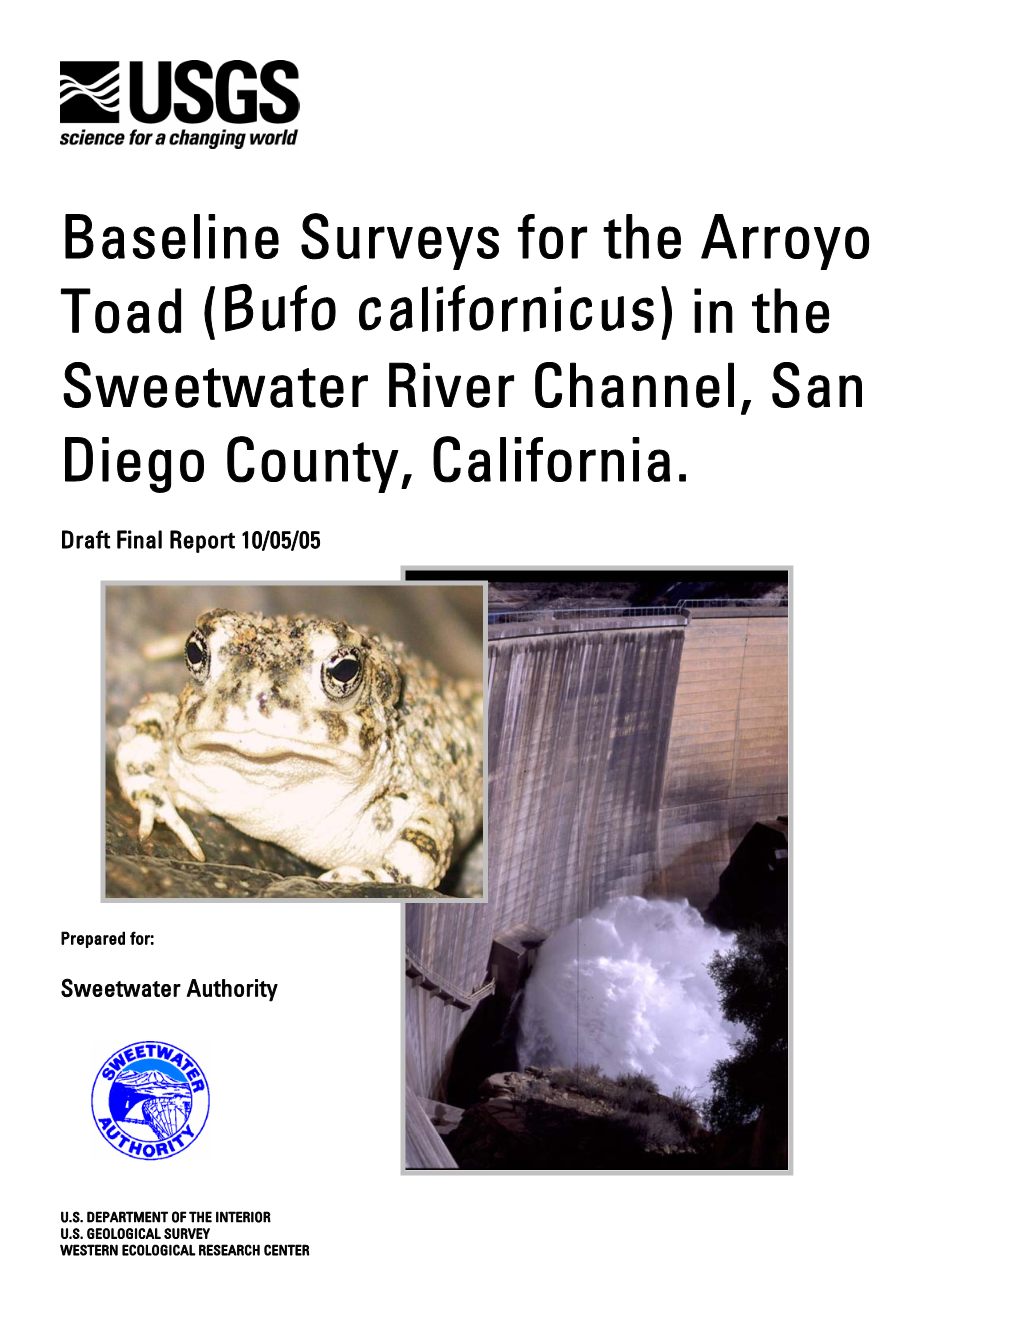 Baseline Surveys for the Arroyo Toad (Bufo Californicus) in the Sweetwater River Channel, San